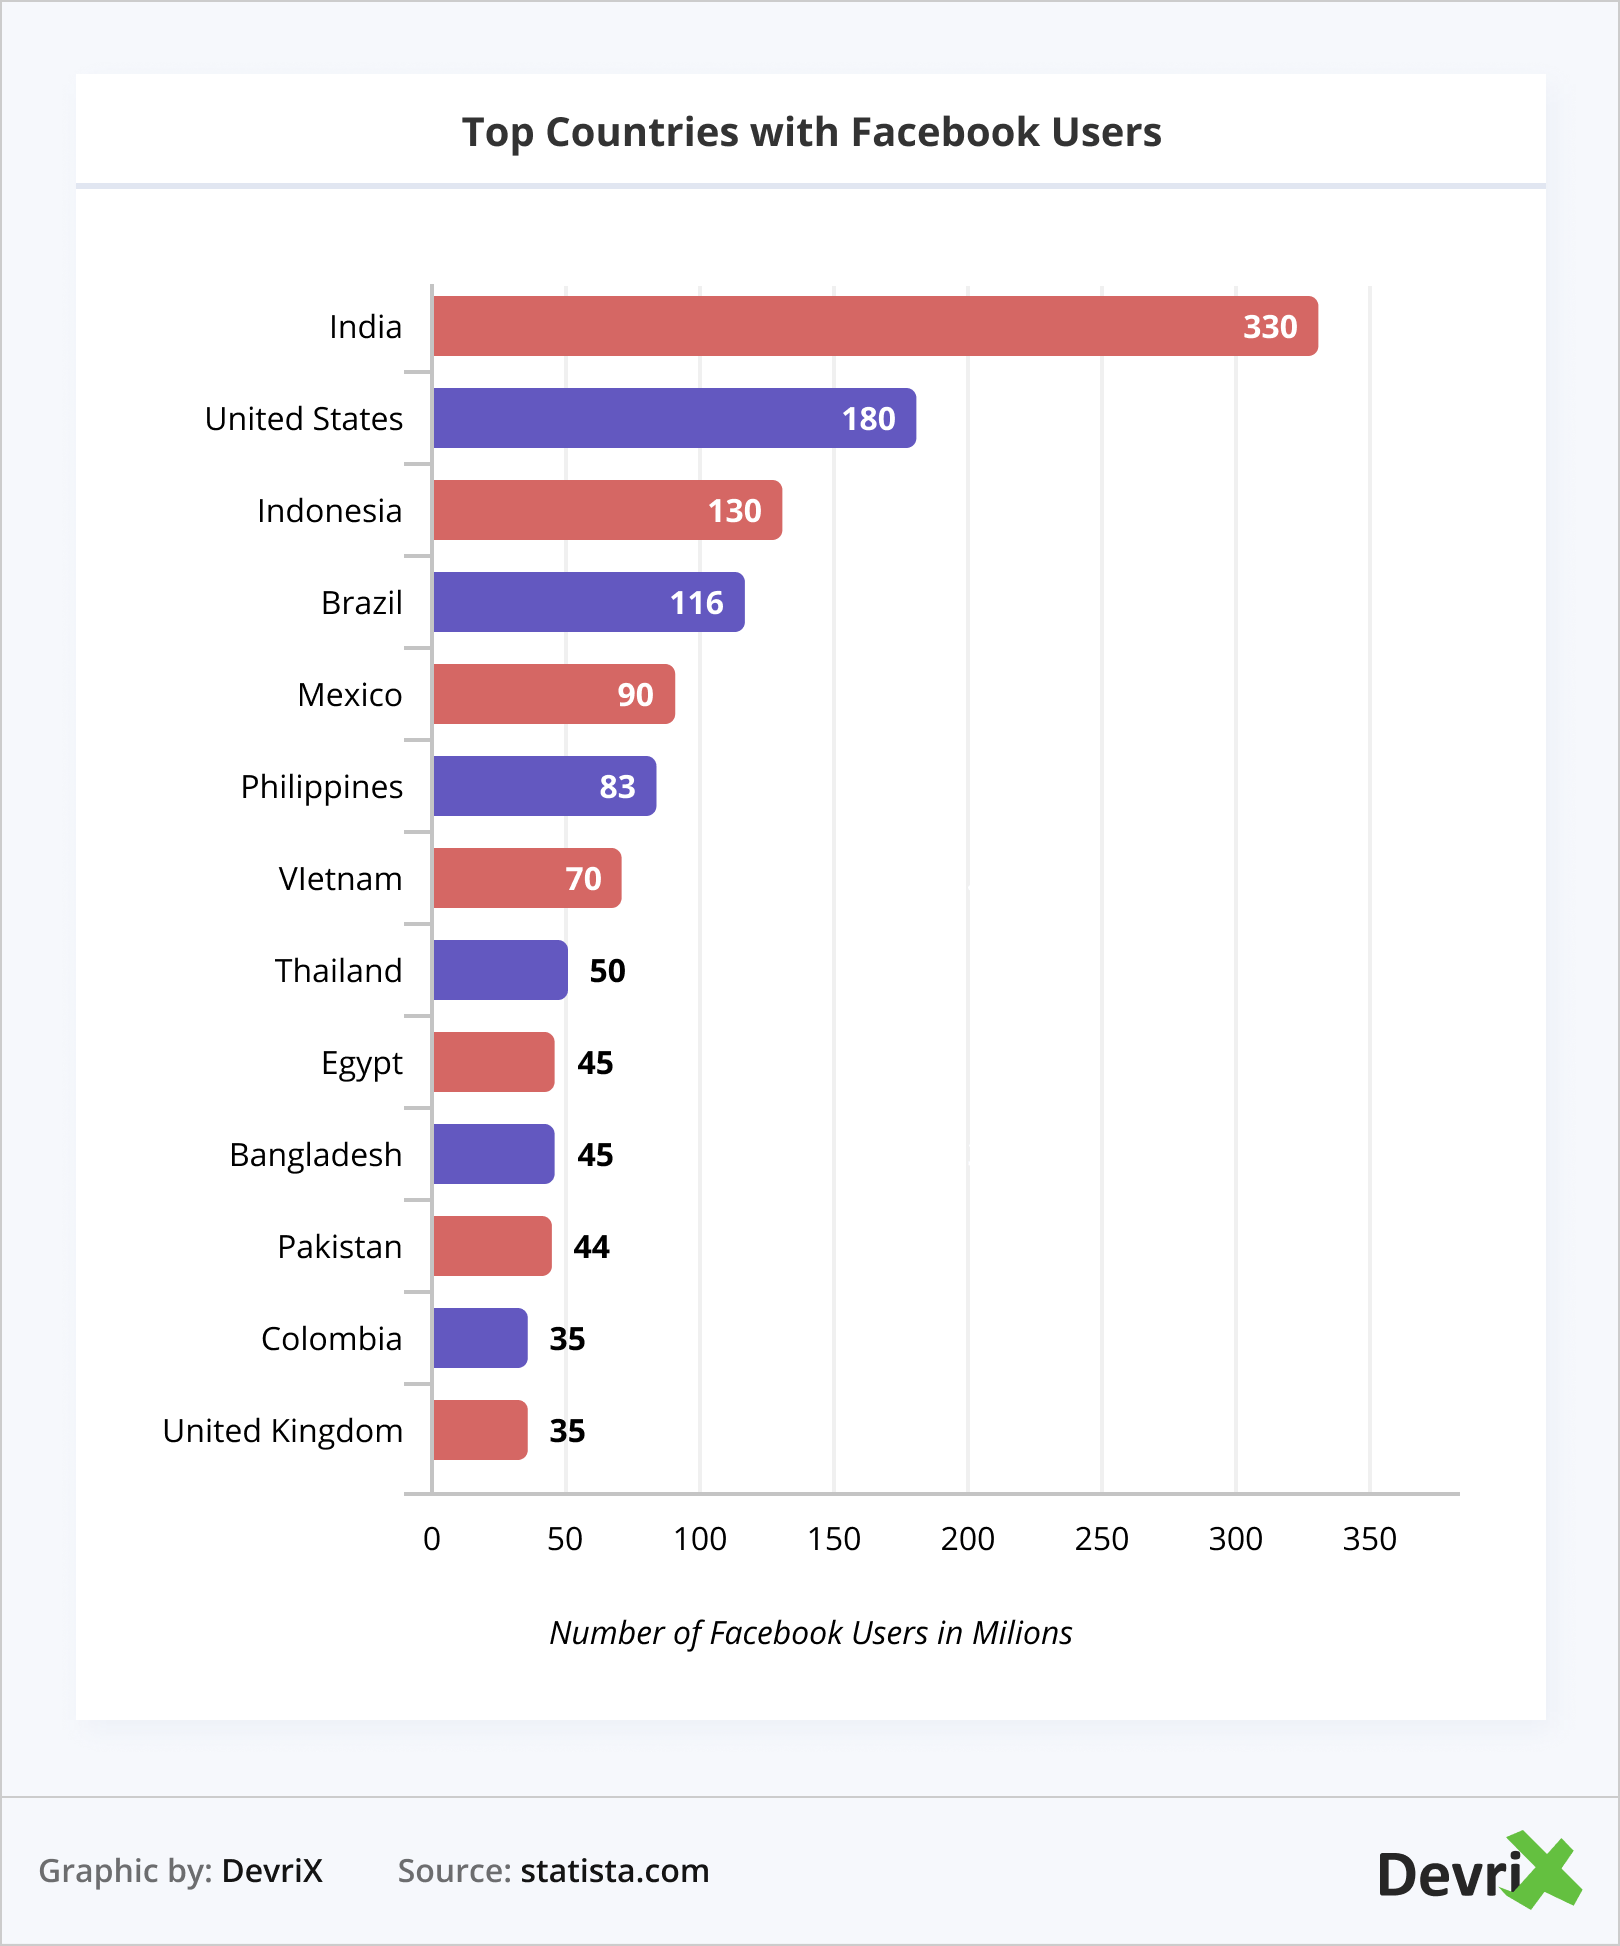 Top Countries with Facebook Users